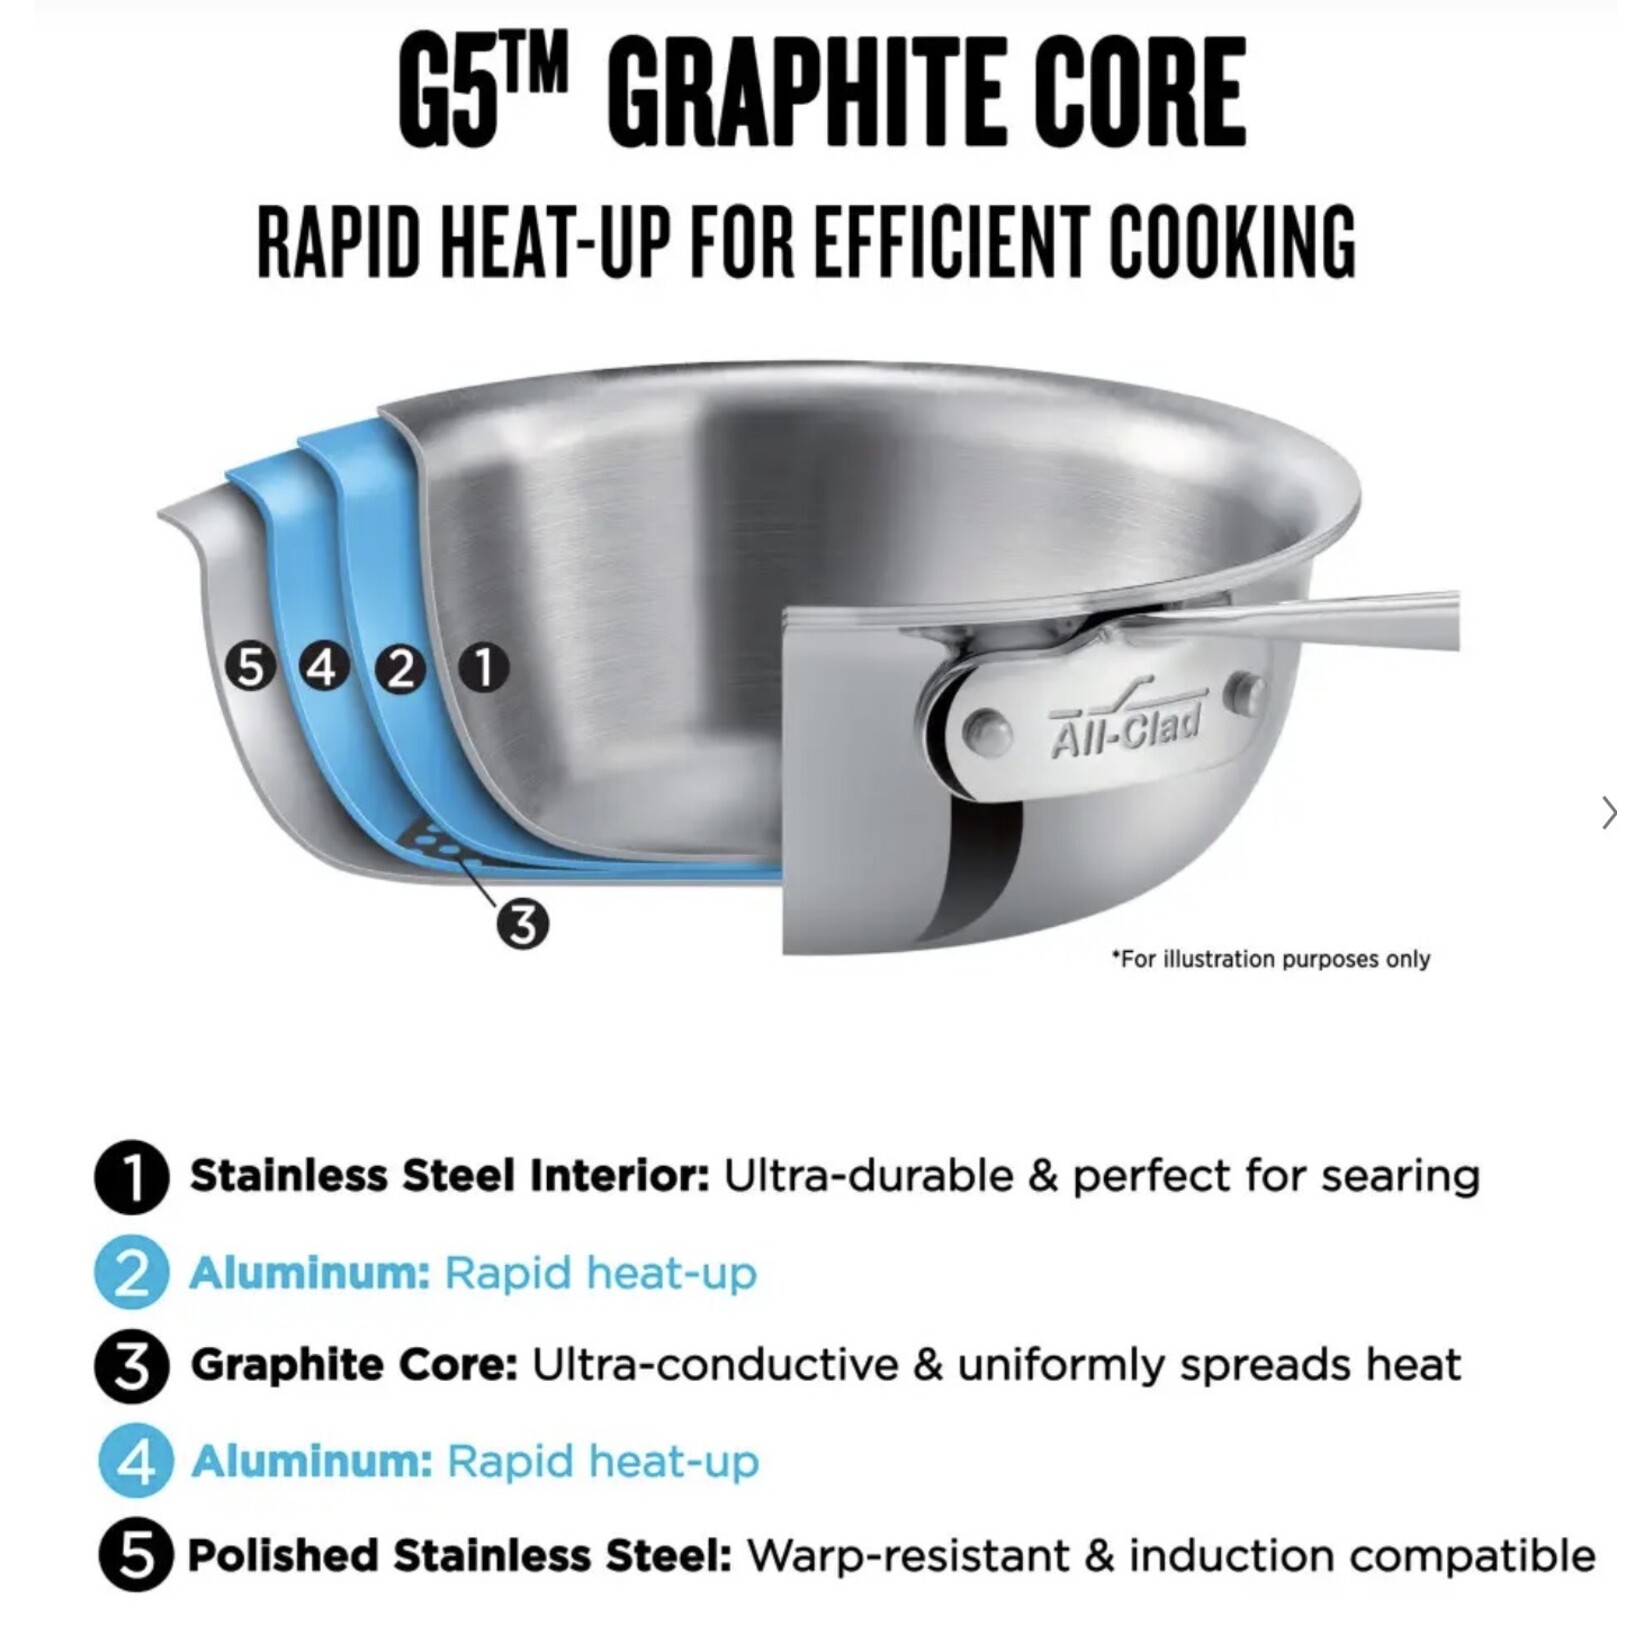 ALL CLAD ALL CLAD G5 Graphite Core Skillet 12.5" w/lid REG 475.99